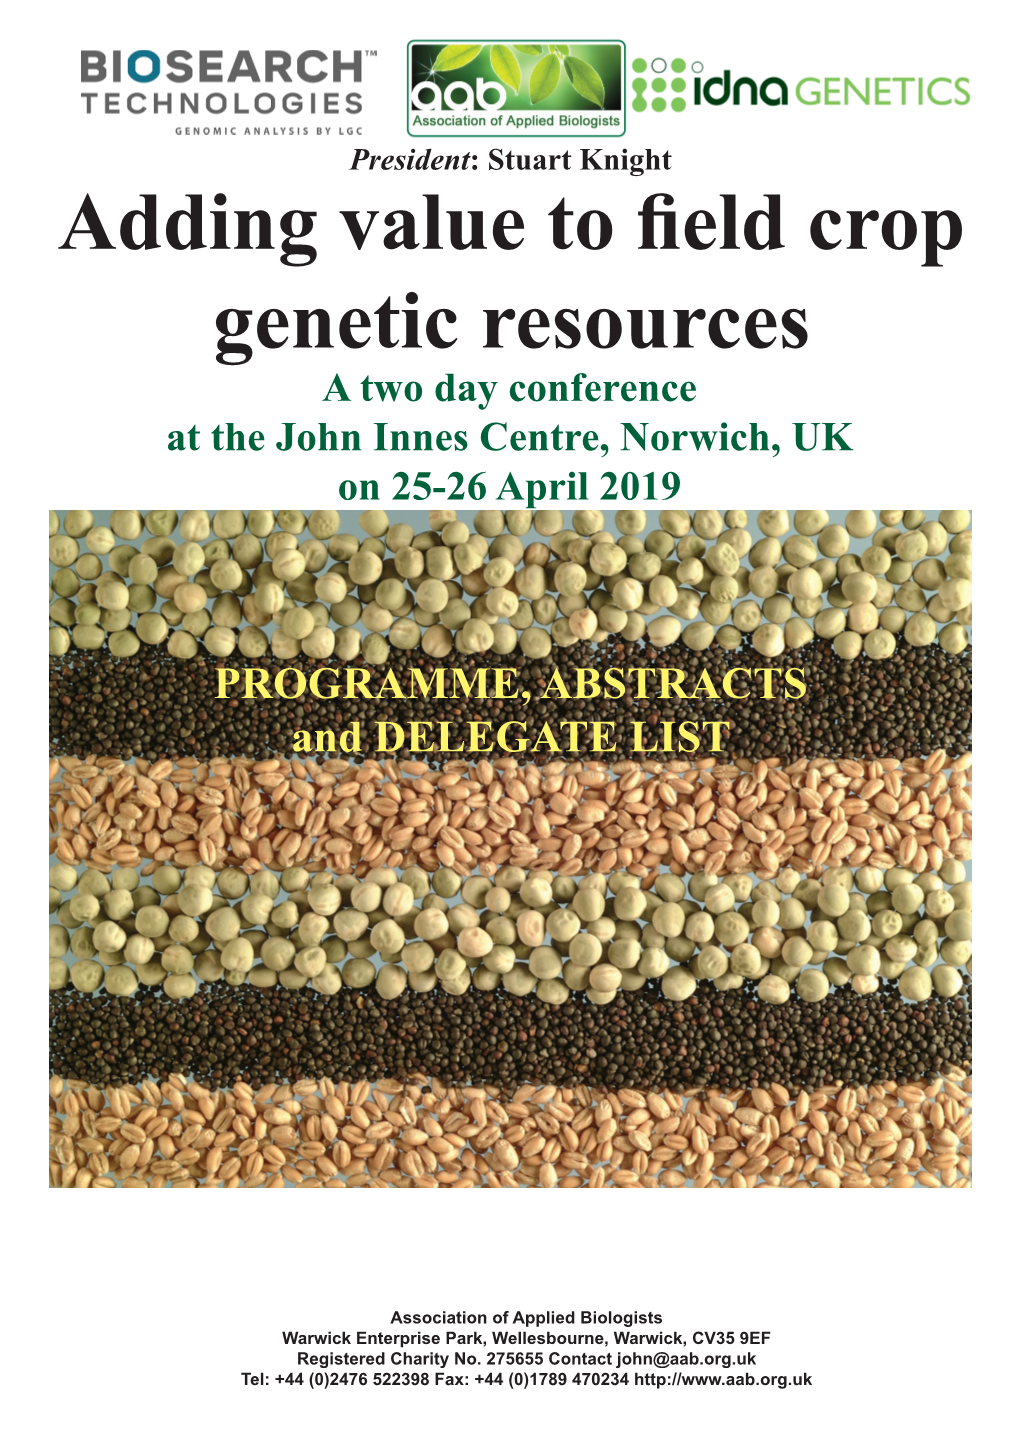 Adding Value to Field Crop Genetic Resources a Two Day Conference at the John Innes Centre, Norwich, UK on 25-26 April 2019